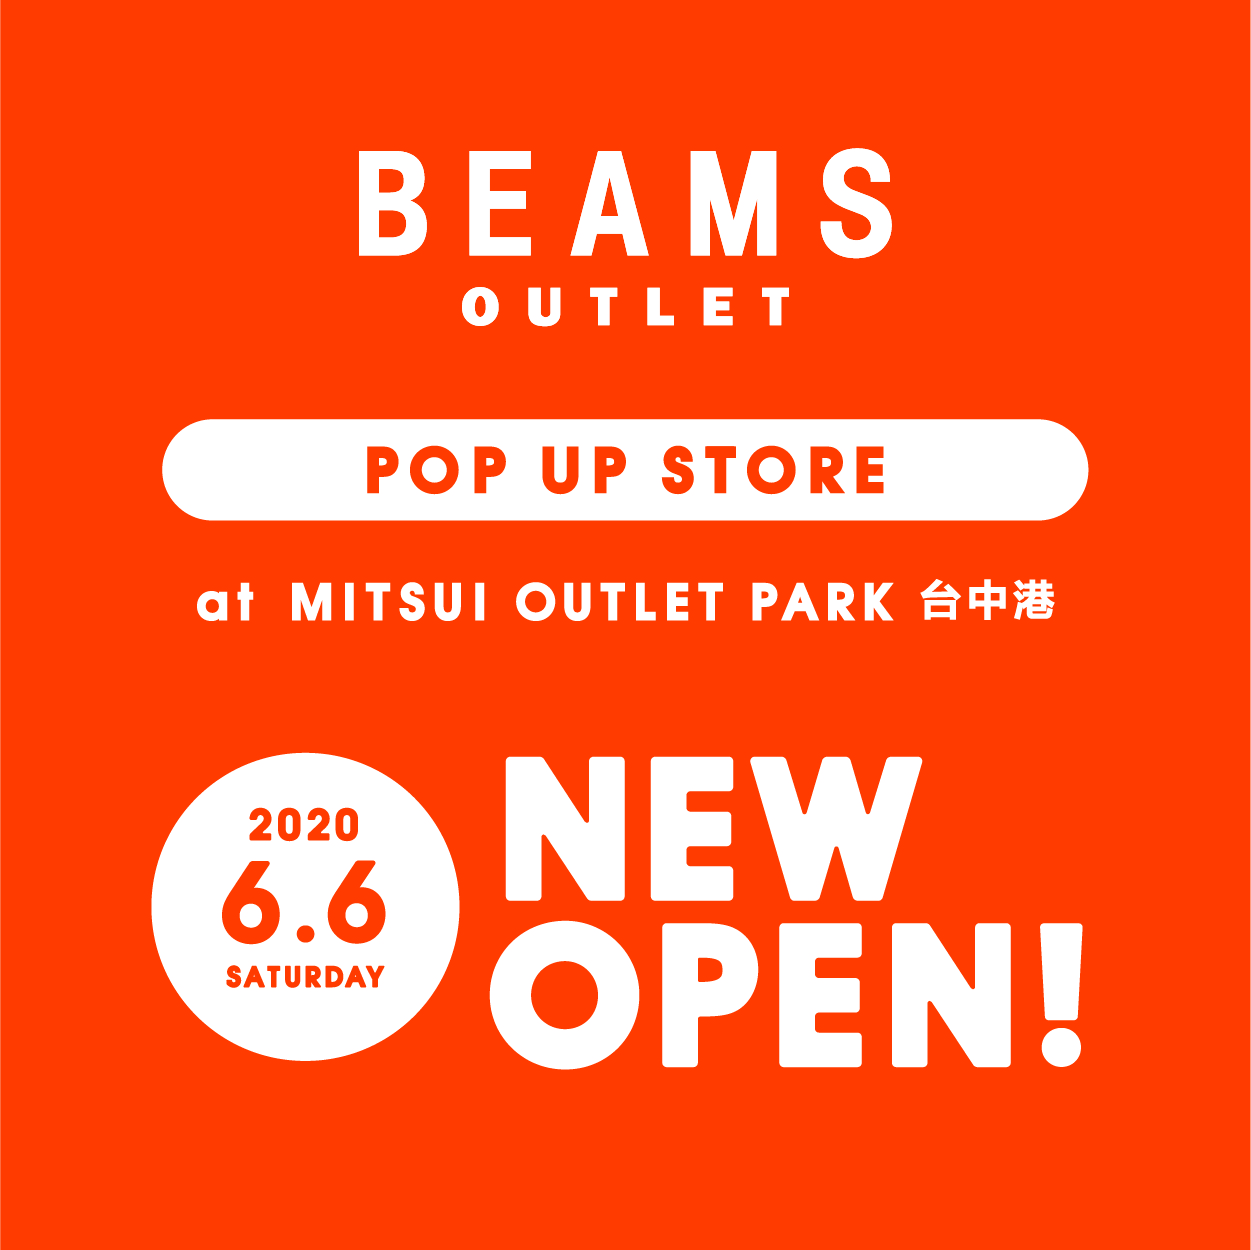 BEAMS OUTLET台中三井期間限定店 NEW OPEN！